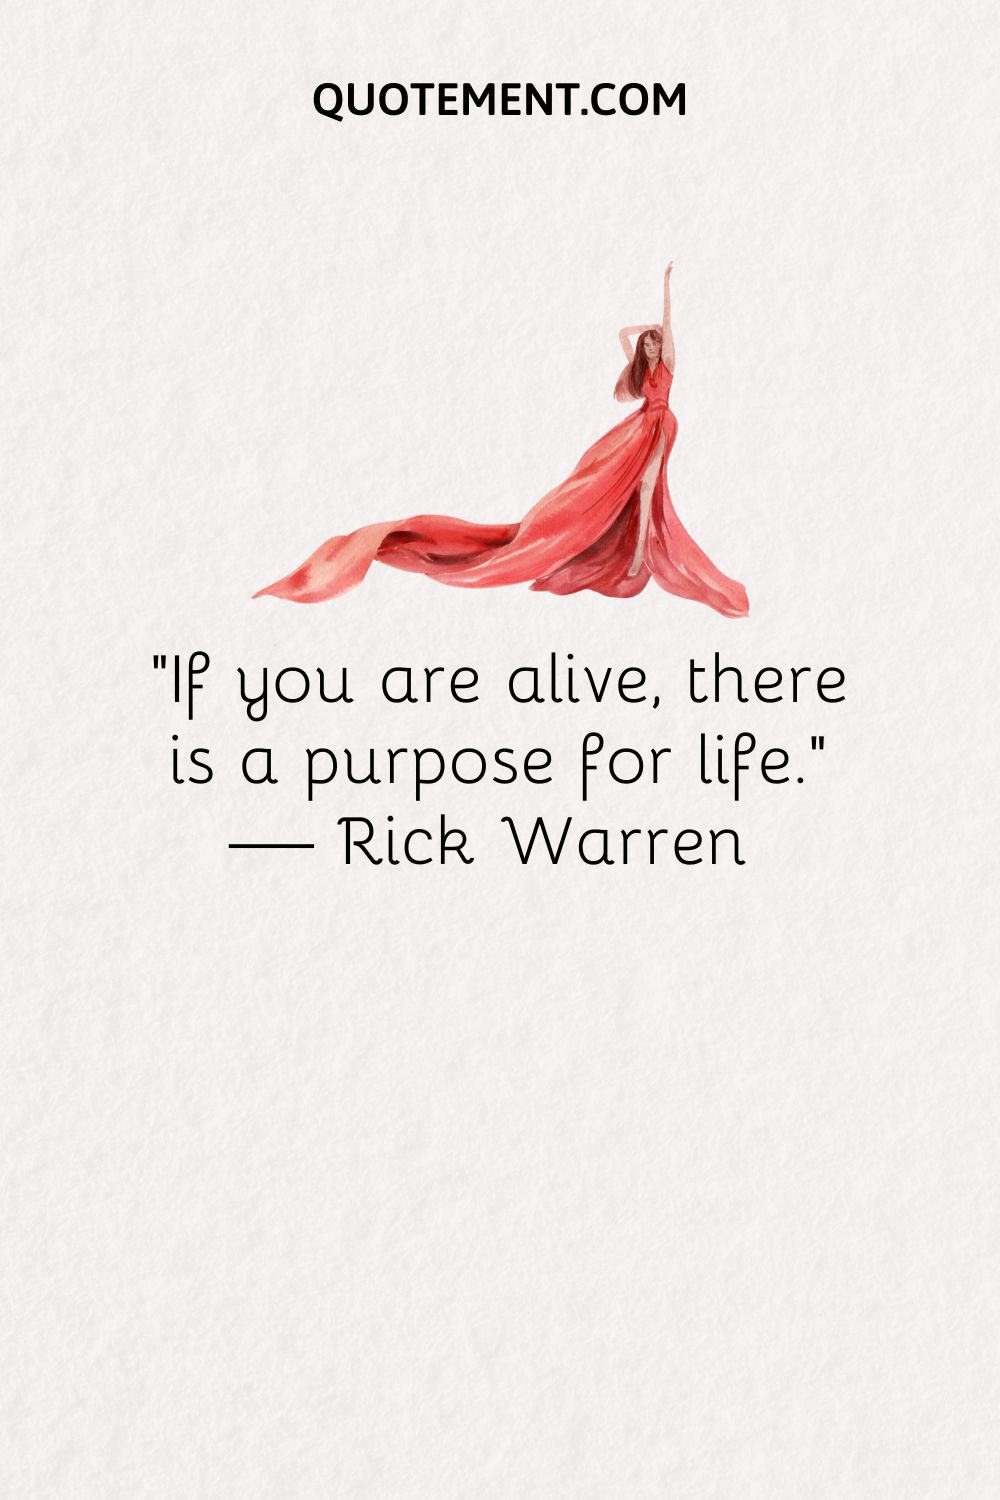 “If you are alive, there is a purpose for life.” — Rick Warren